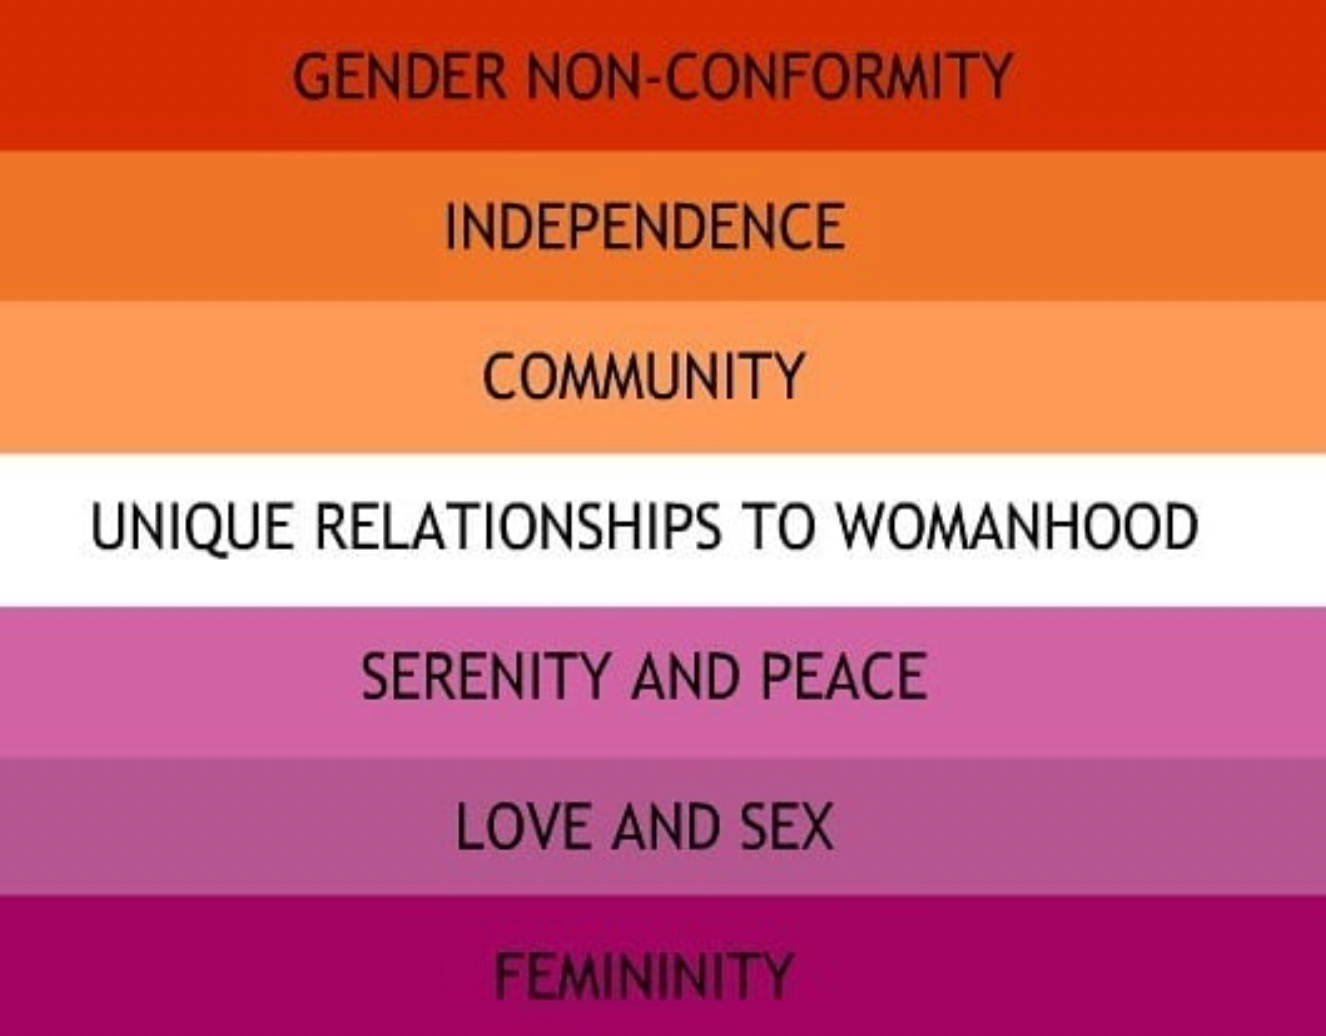 the new sunset lesbian flag created by Emily Gwen